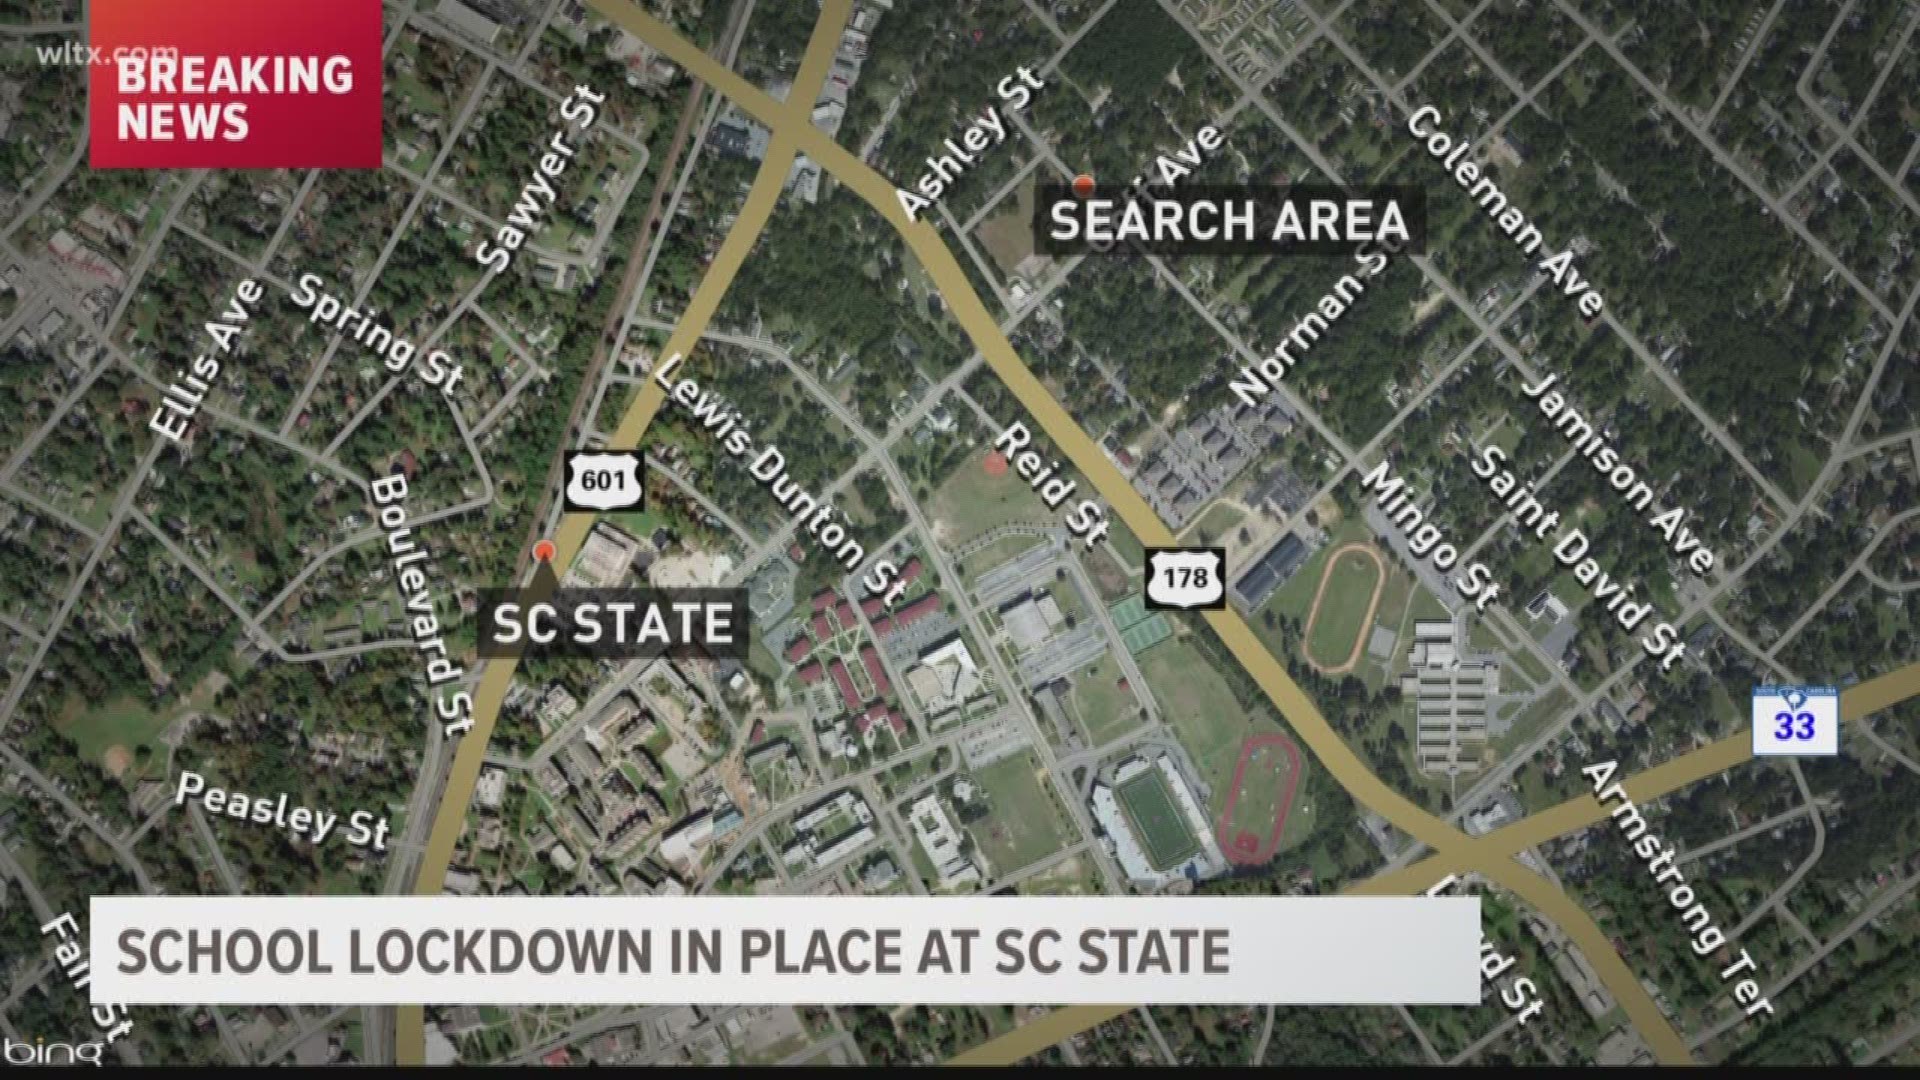 The lockdown was put in effect Monday night, and people are being asked to 'shelter in place.'